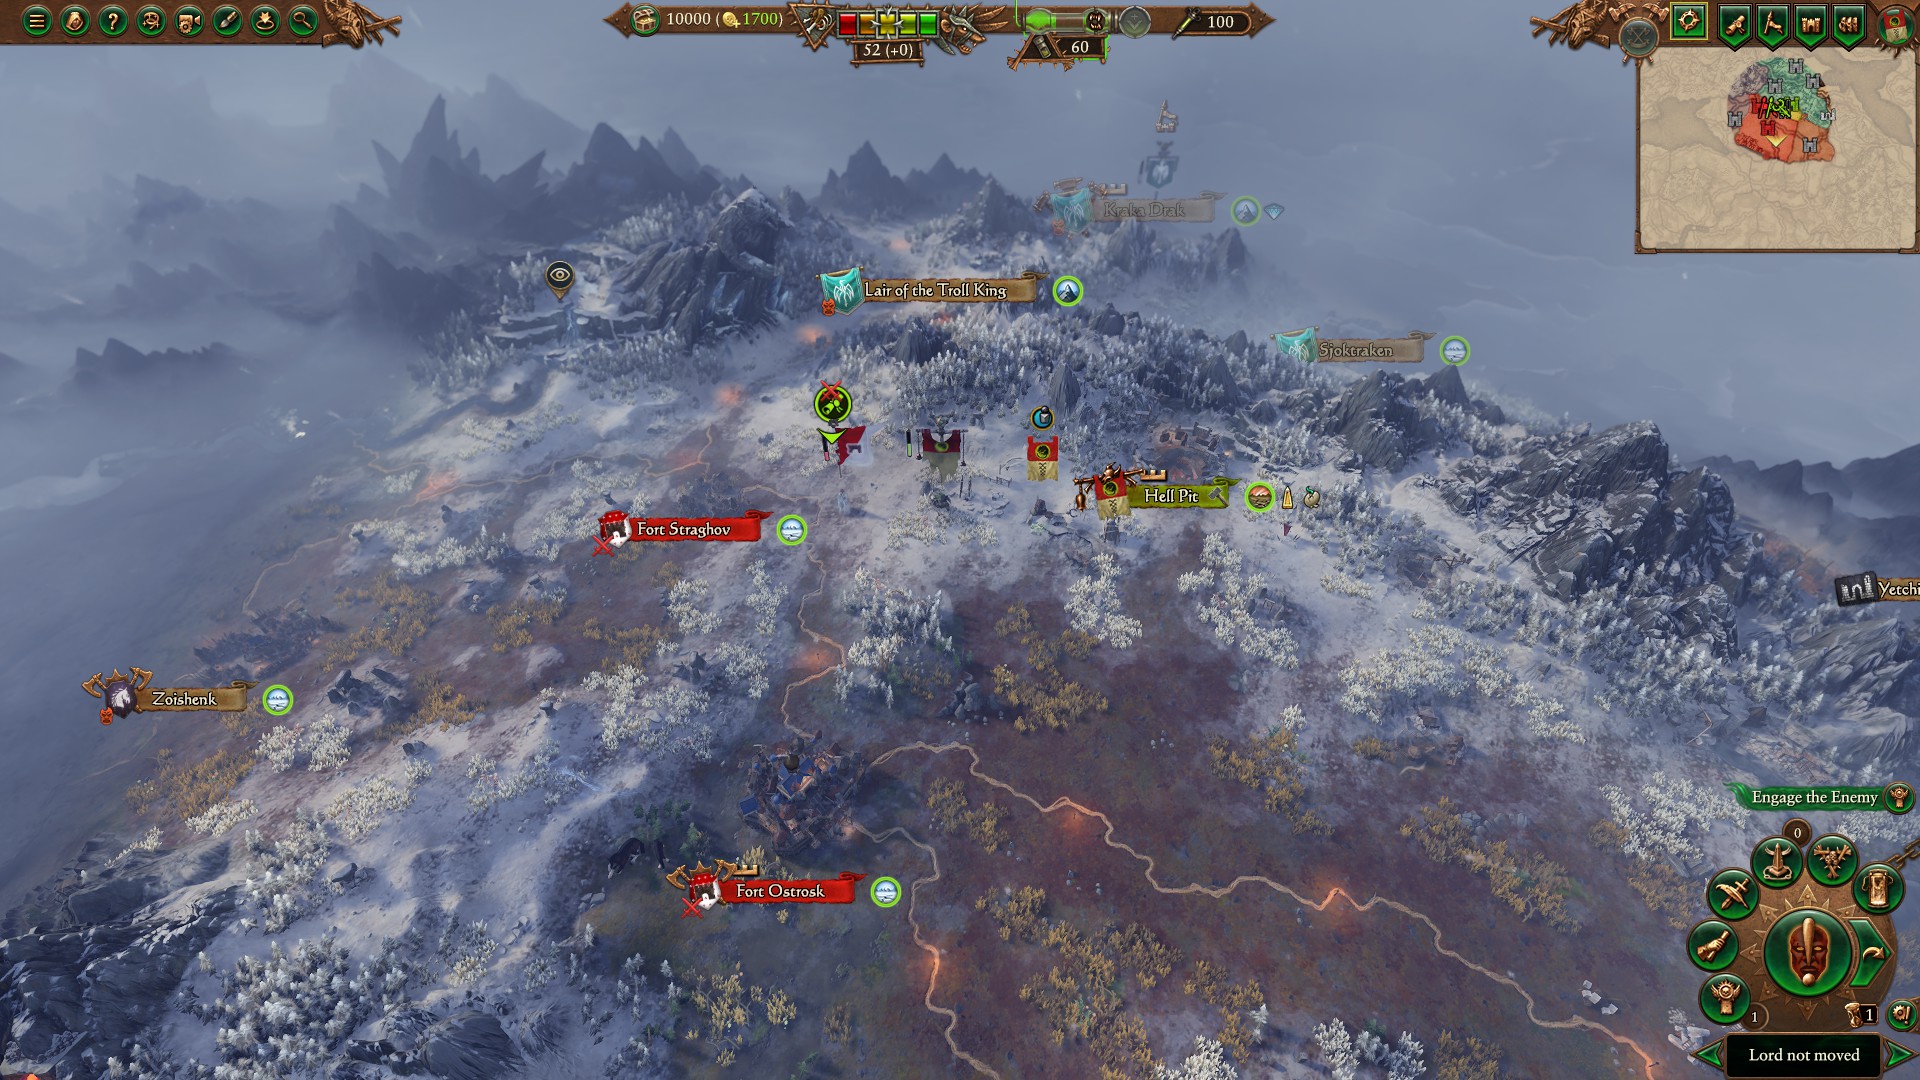 Total War: Warhammer 3 Immortal Empires Throt - Skaven campaign overview, guide and second thoughts image 1